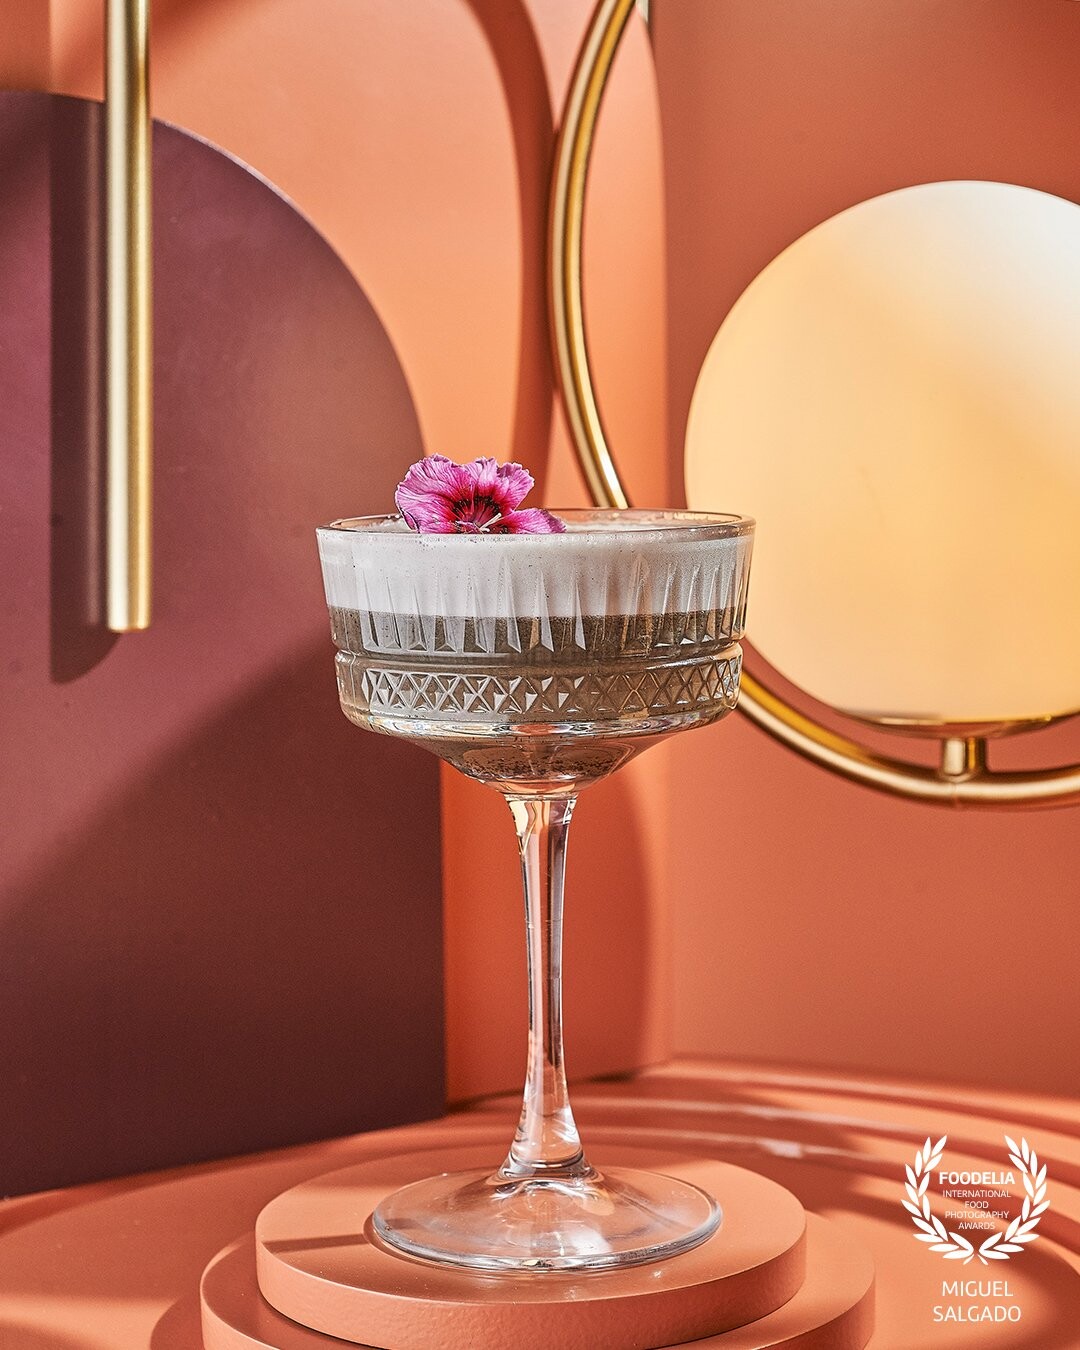 The main concept of this photoshoot were inspired by the interior design of the bar. The long lines, the rounded forms, the use repetition and the colors were complimented with a lighting setup that included harsh shadows and some soft controlled light to model the glassware.